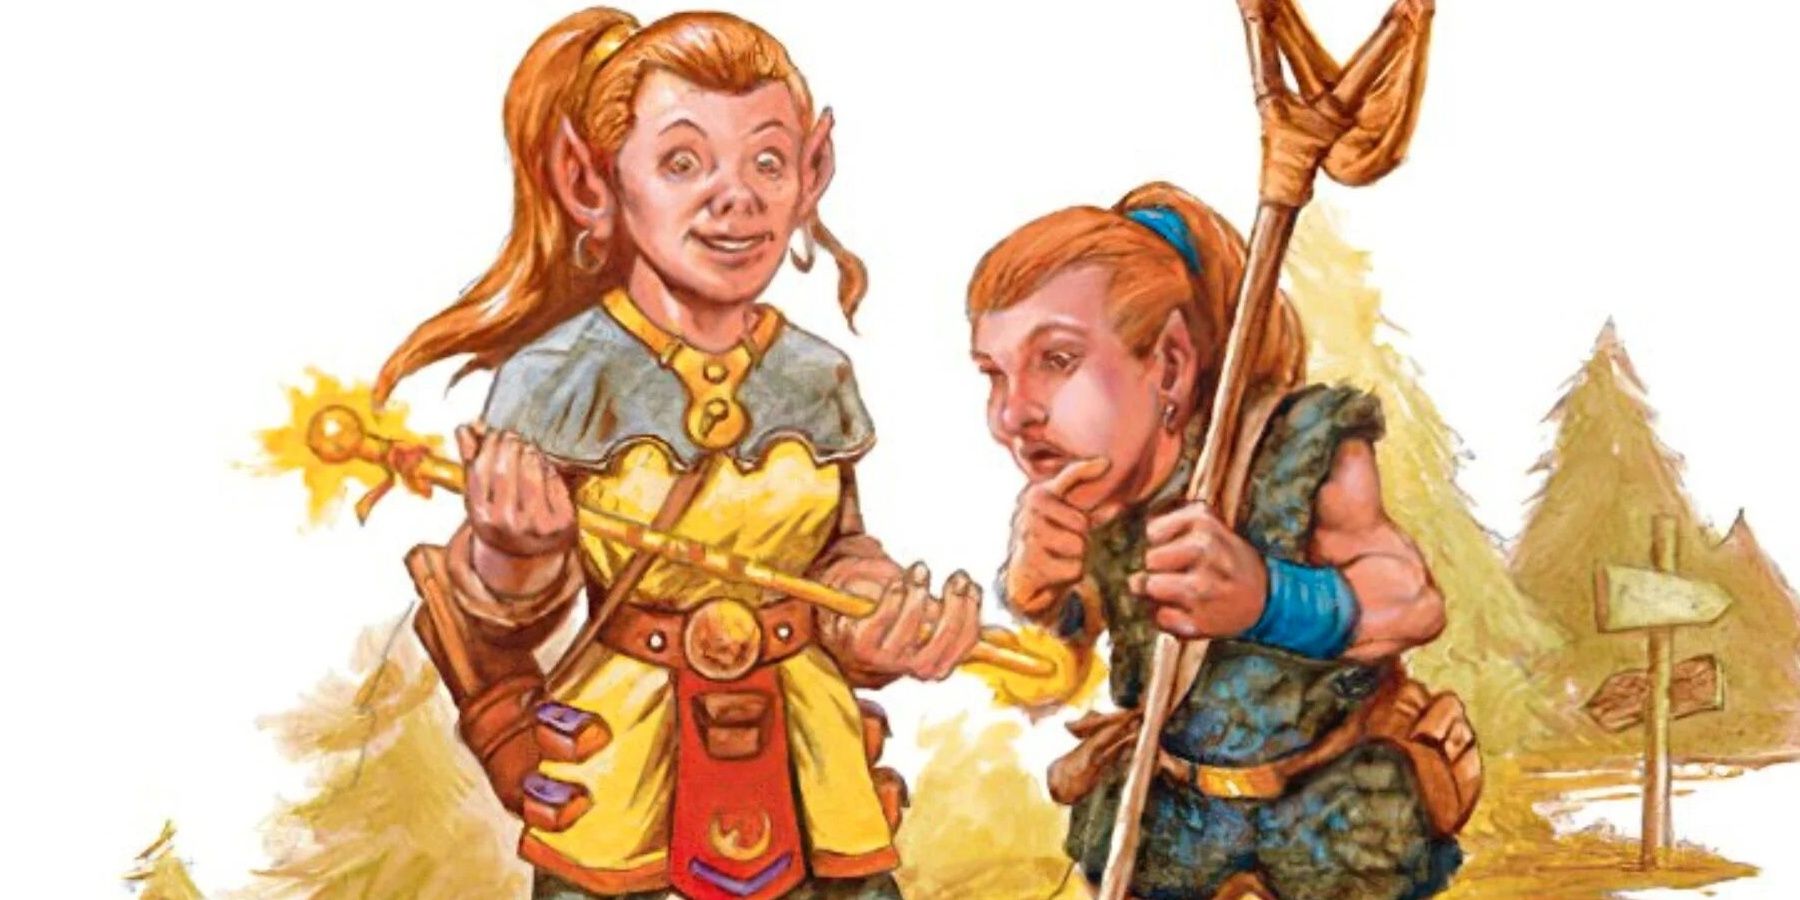 Kender from Dragonlance Campaign Setting by Wizards of the Coast Cropped